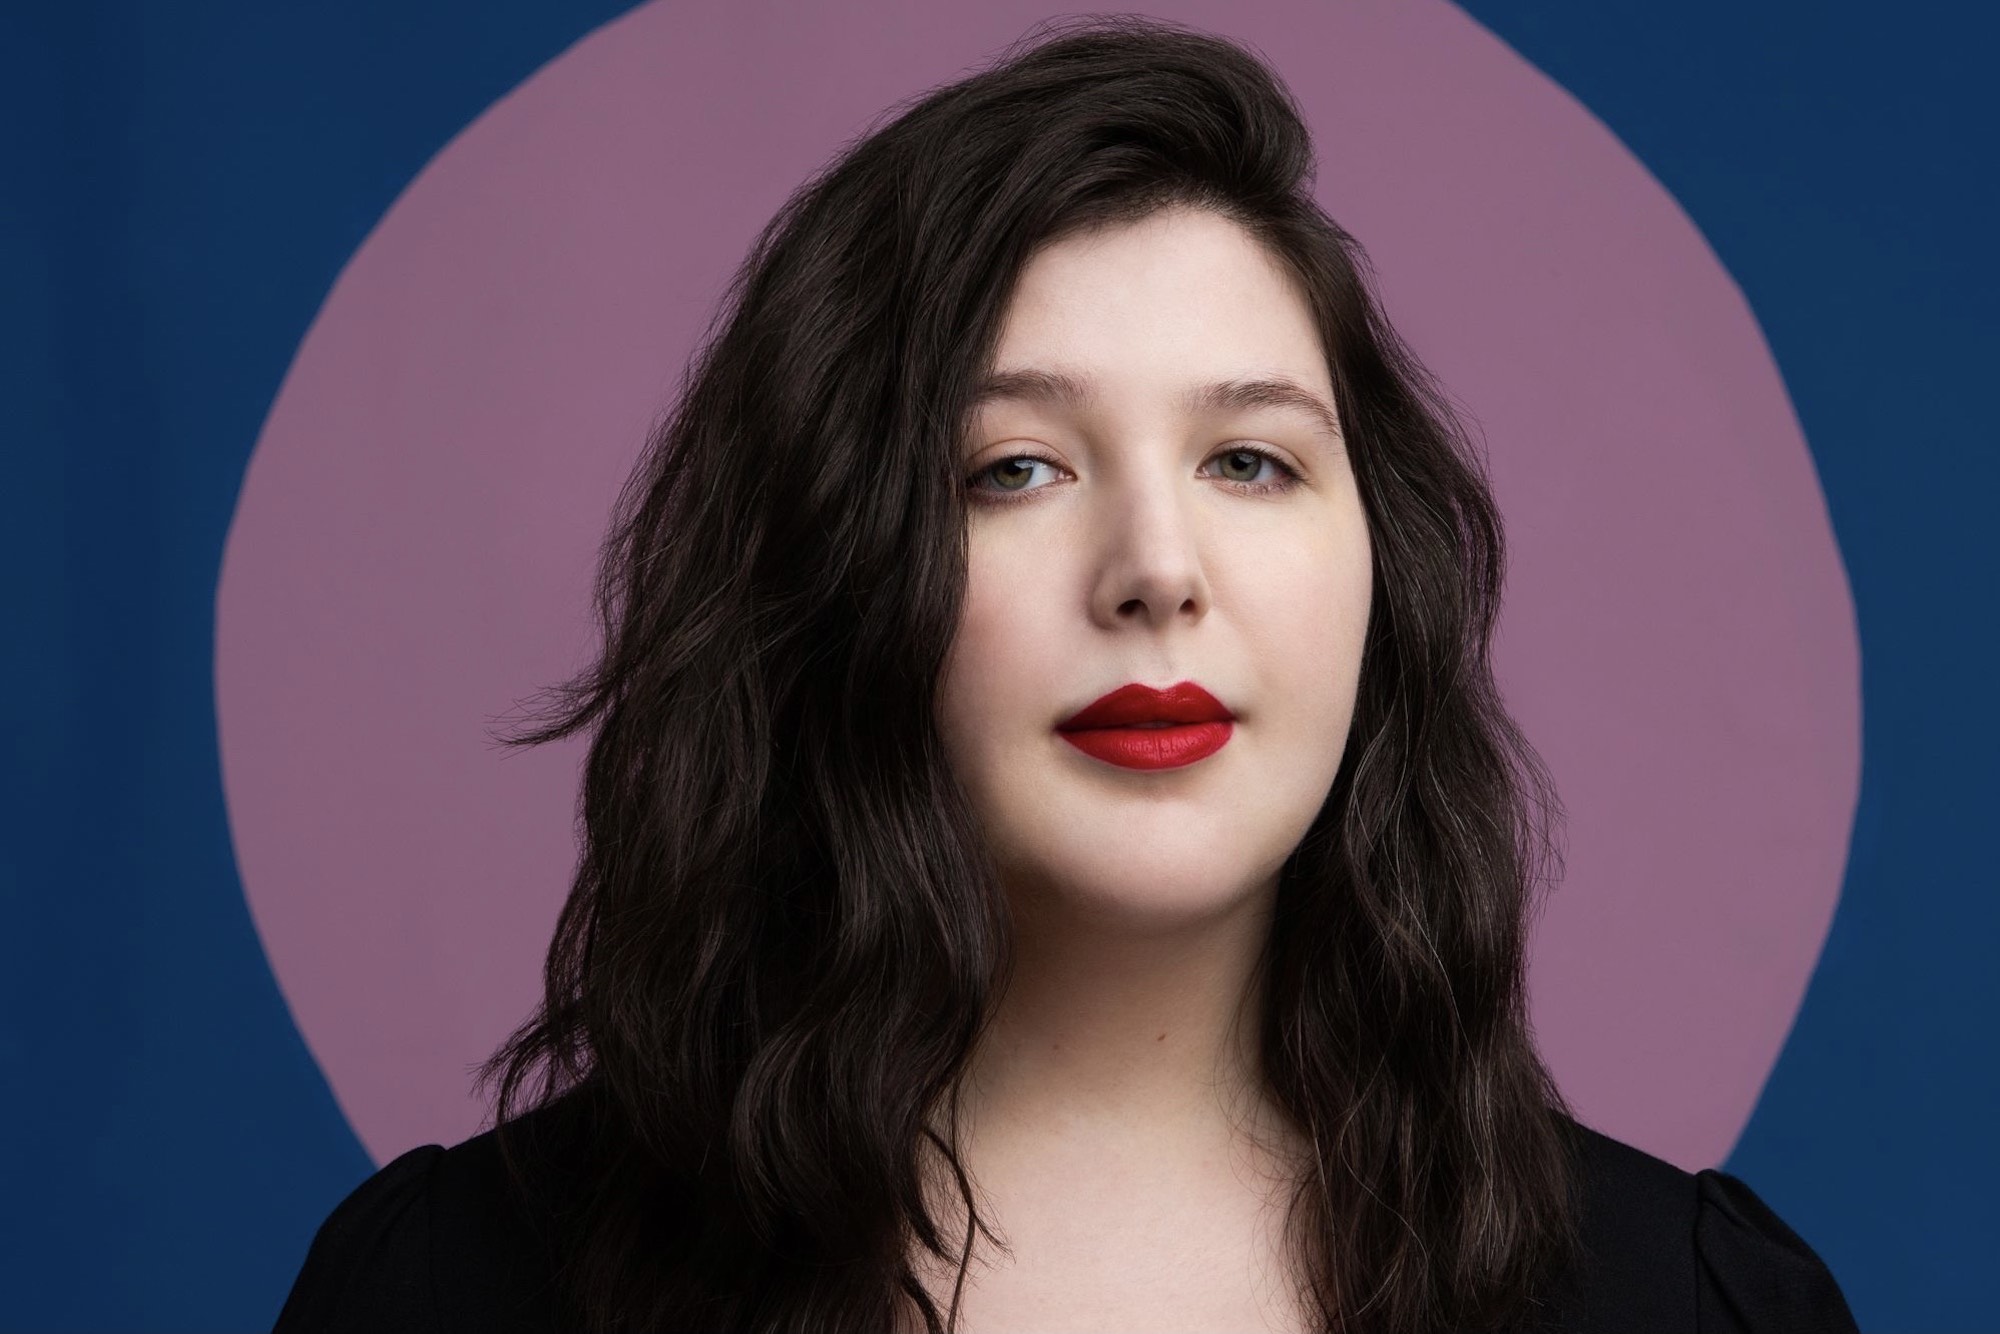 Lucy Dacus Tears Through Past on Third Album ‘Home Video,’ Remembers Former Self on “Hot & Heavy”